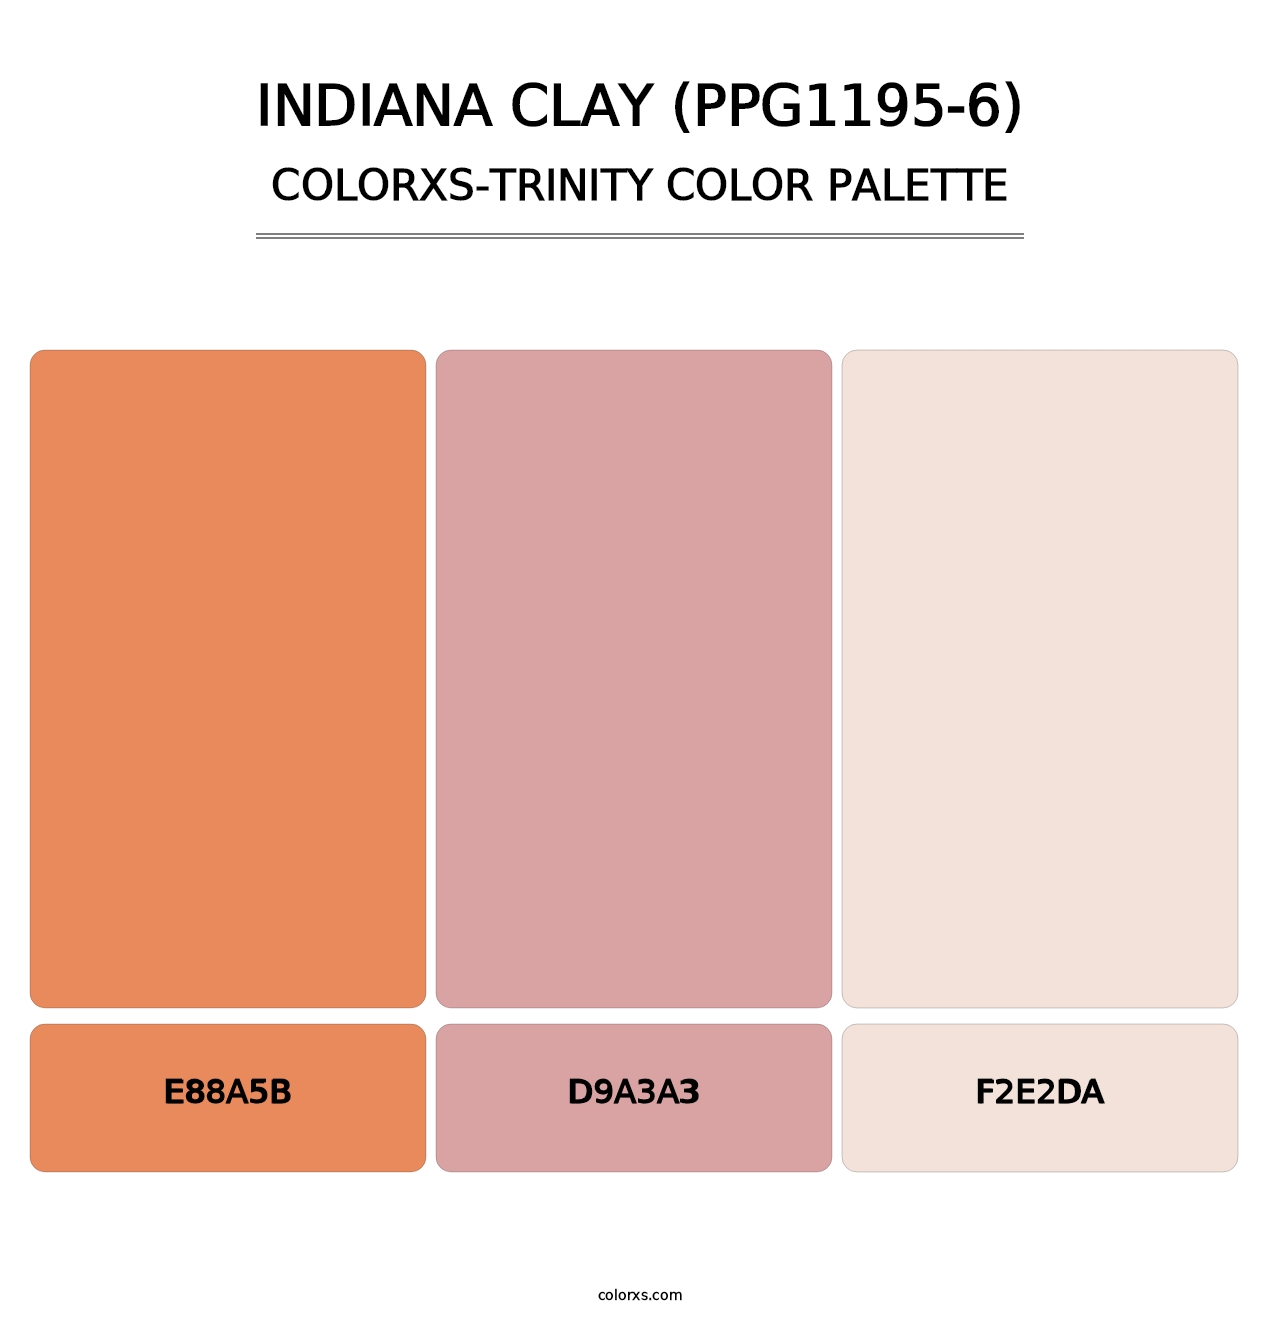 Indiana Clay (PPG1195-6) - Colorxs Trinity Palette